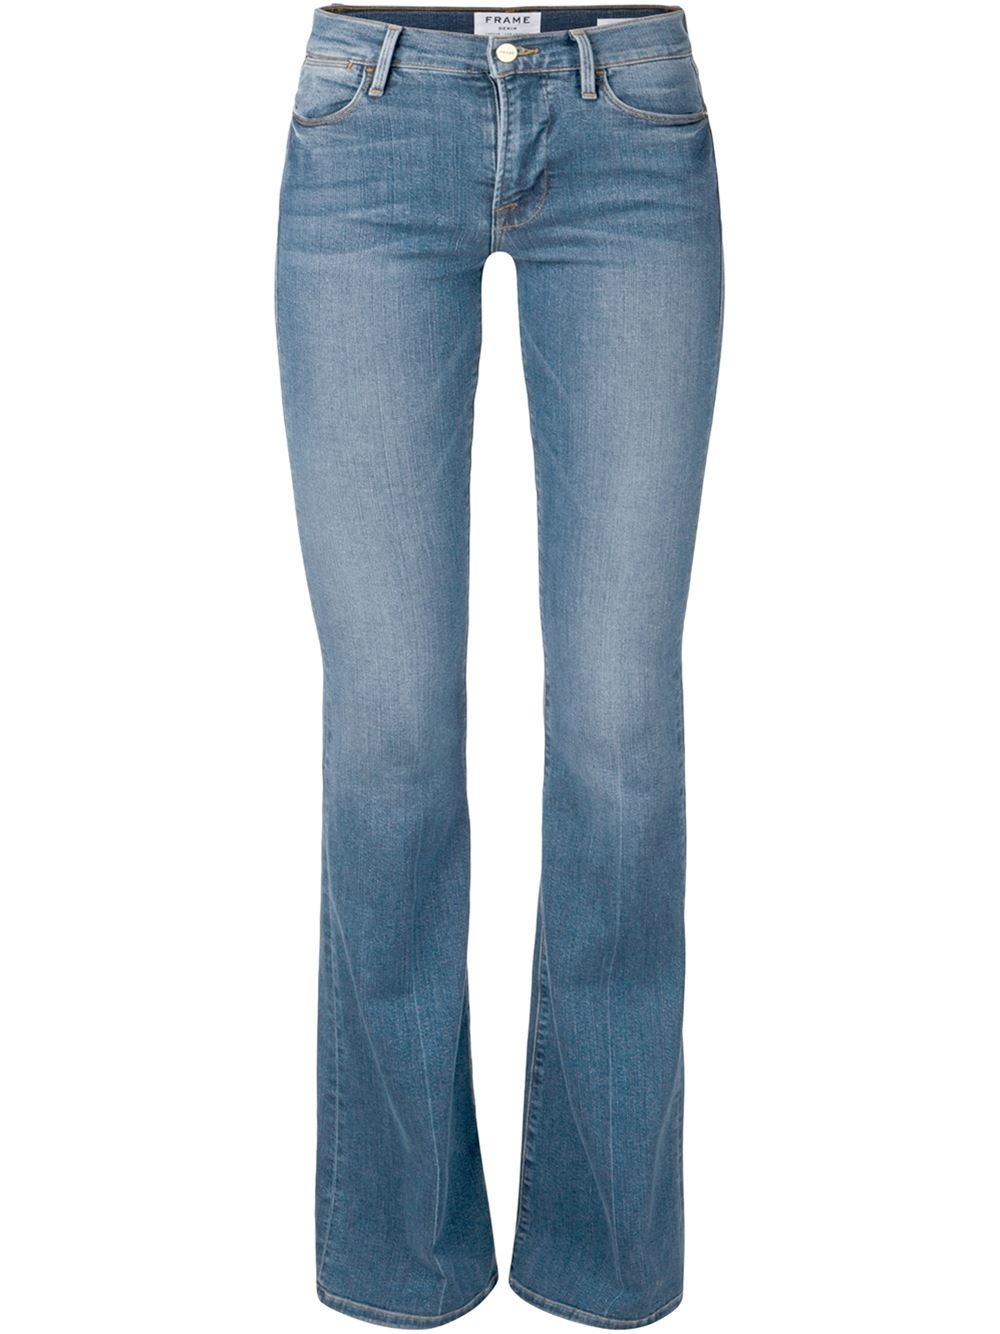 Lyst - Frame Le High Flare Jeans in Blue